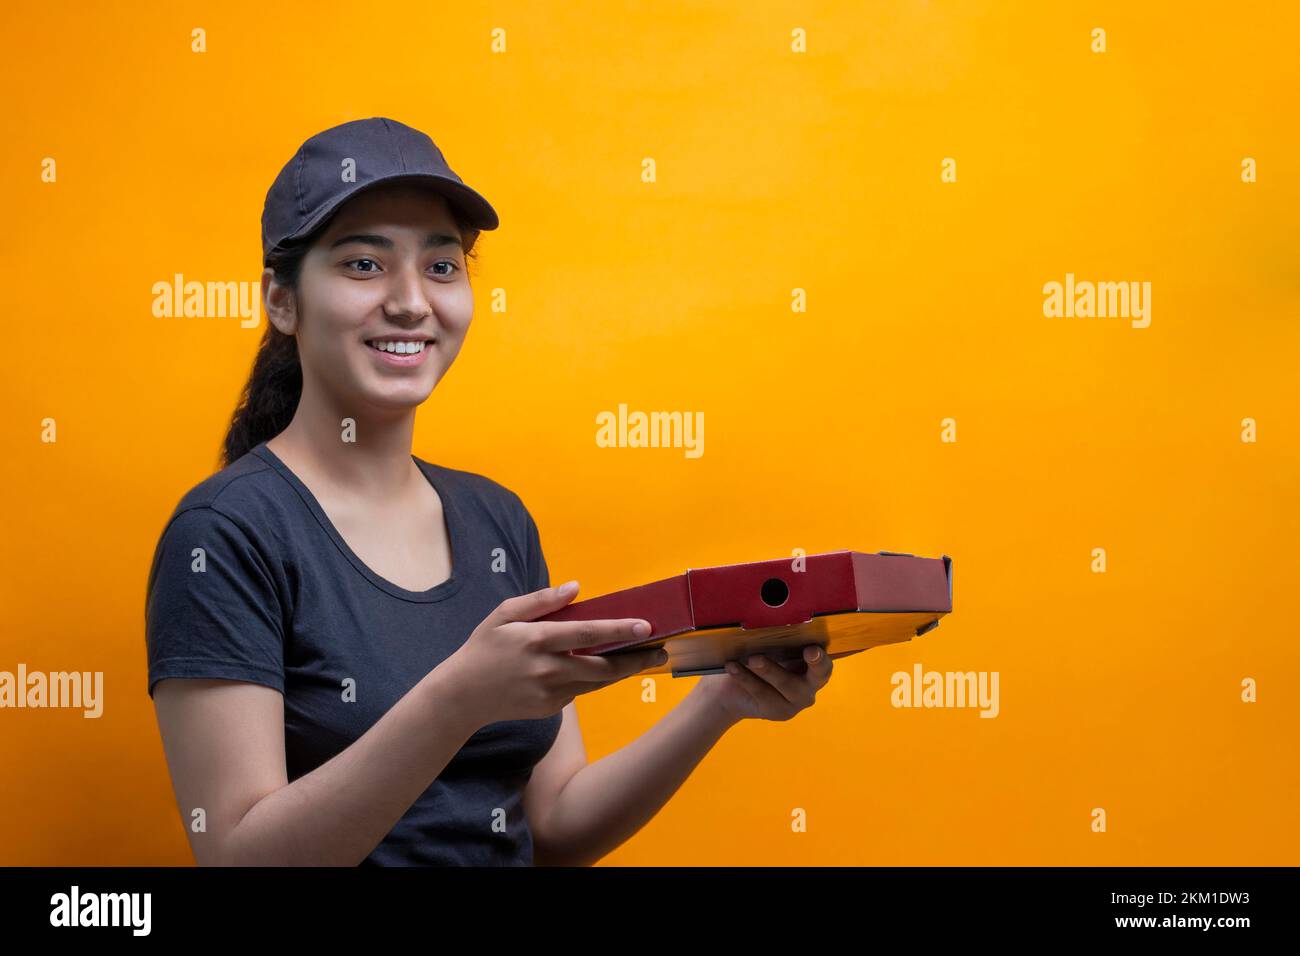 Smiling delivery woman carrying Pizza box against Yellow background Stock Photo